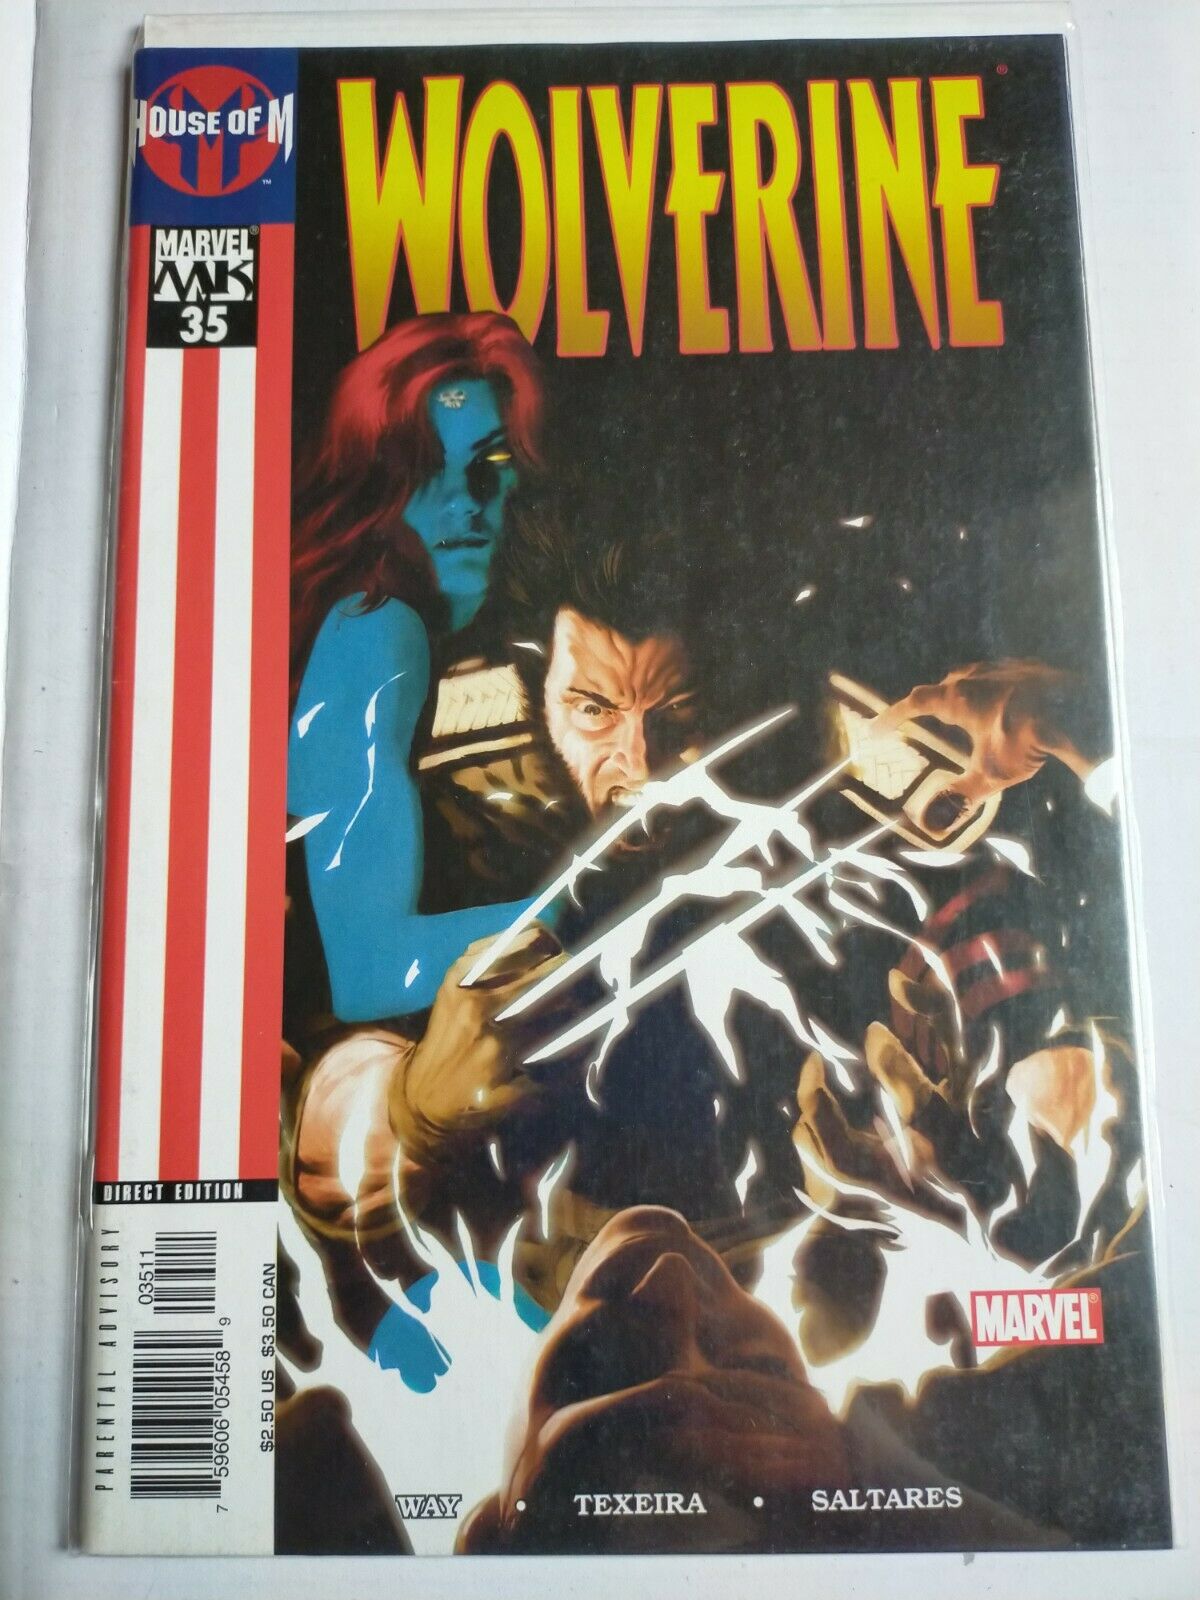 Marvel MK House of M Comic Book Wolverine No.35